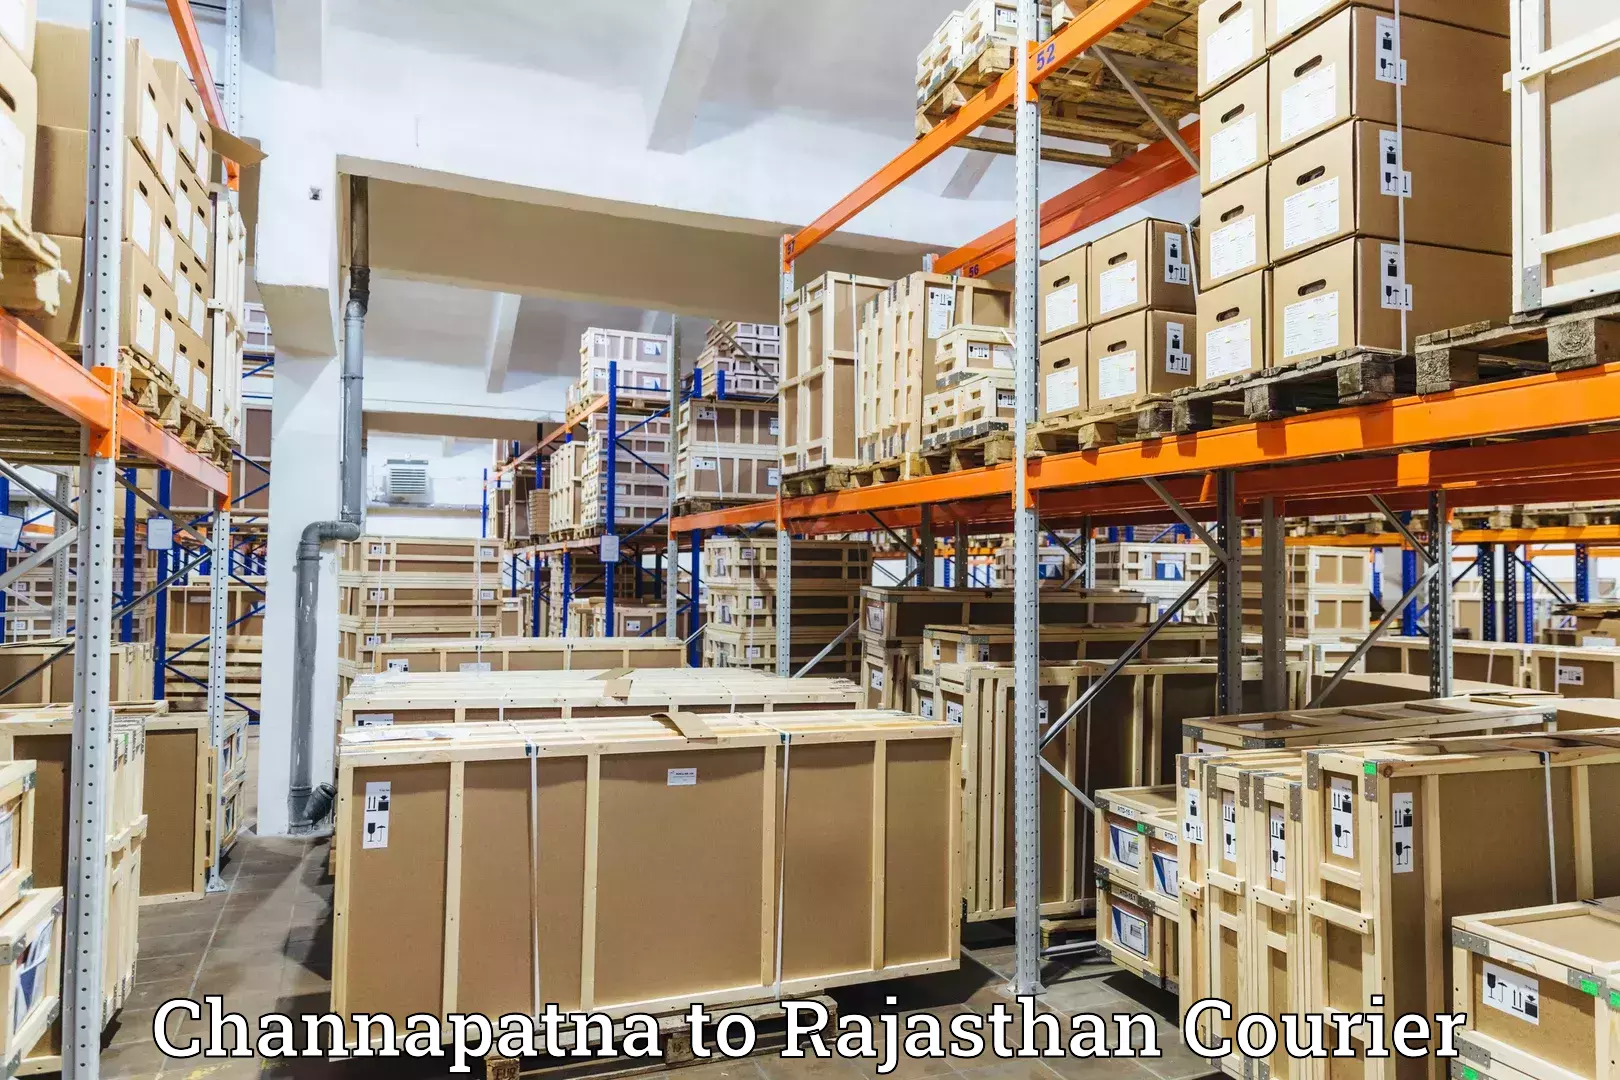 Courier service comparison Channapatna to Renwal